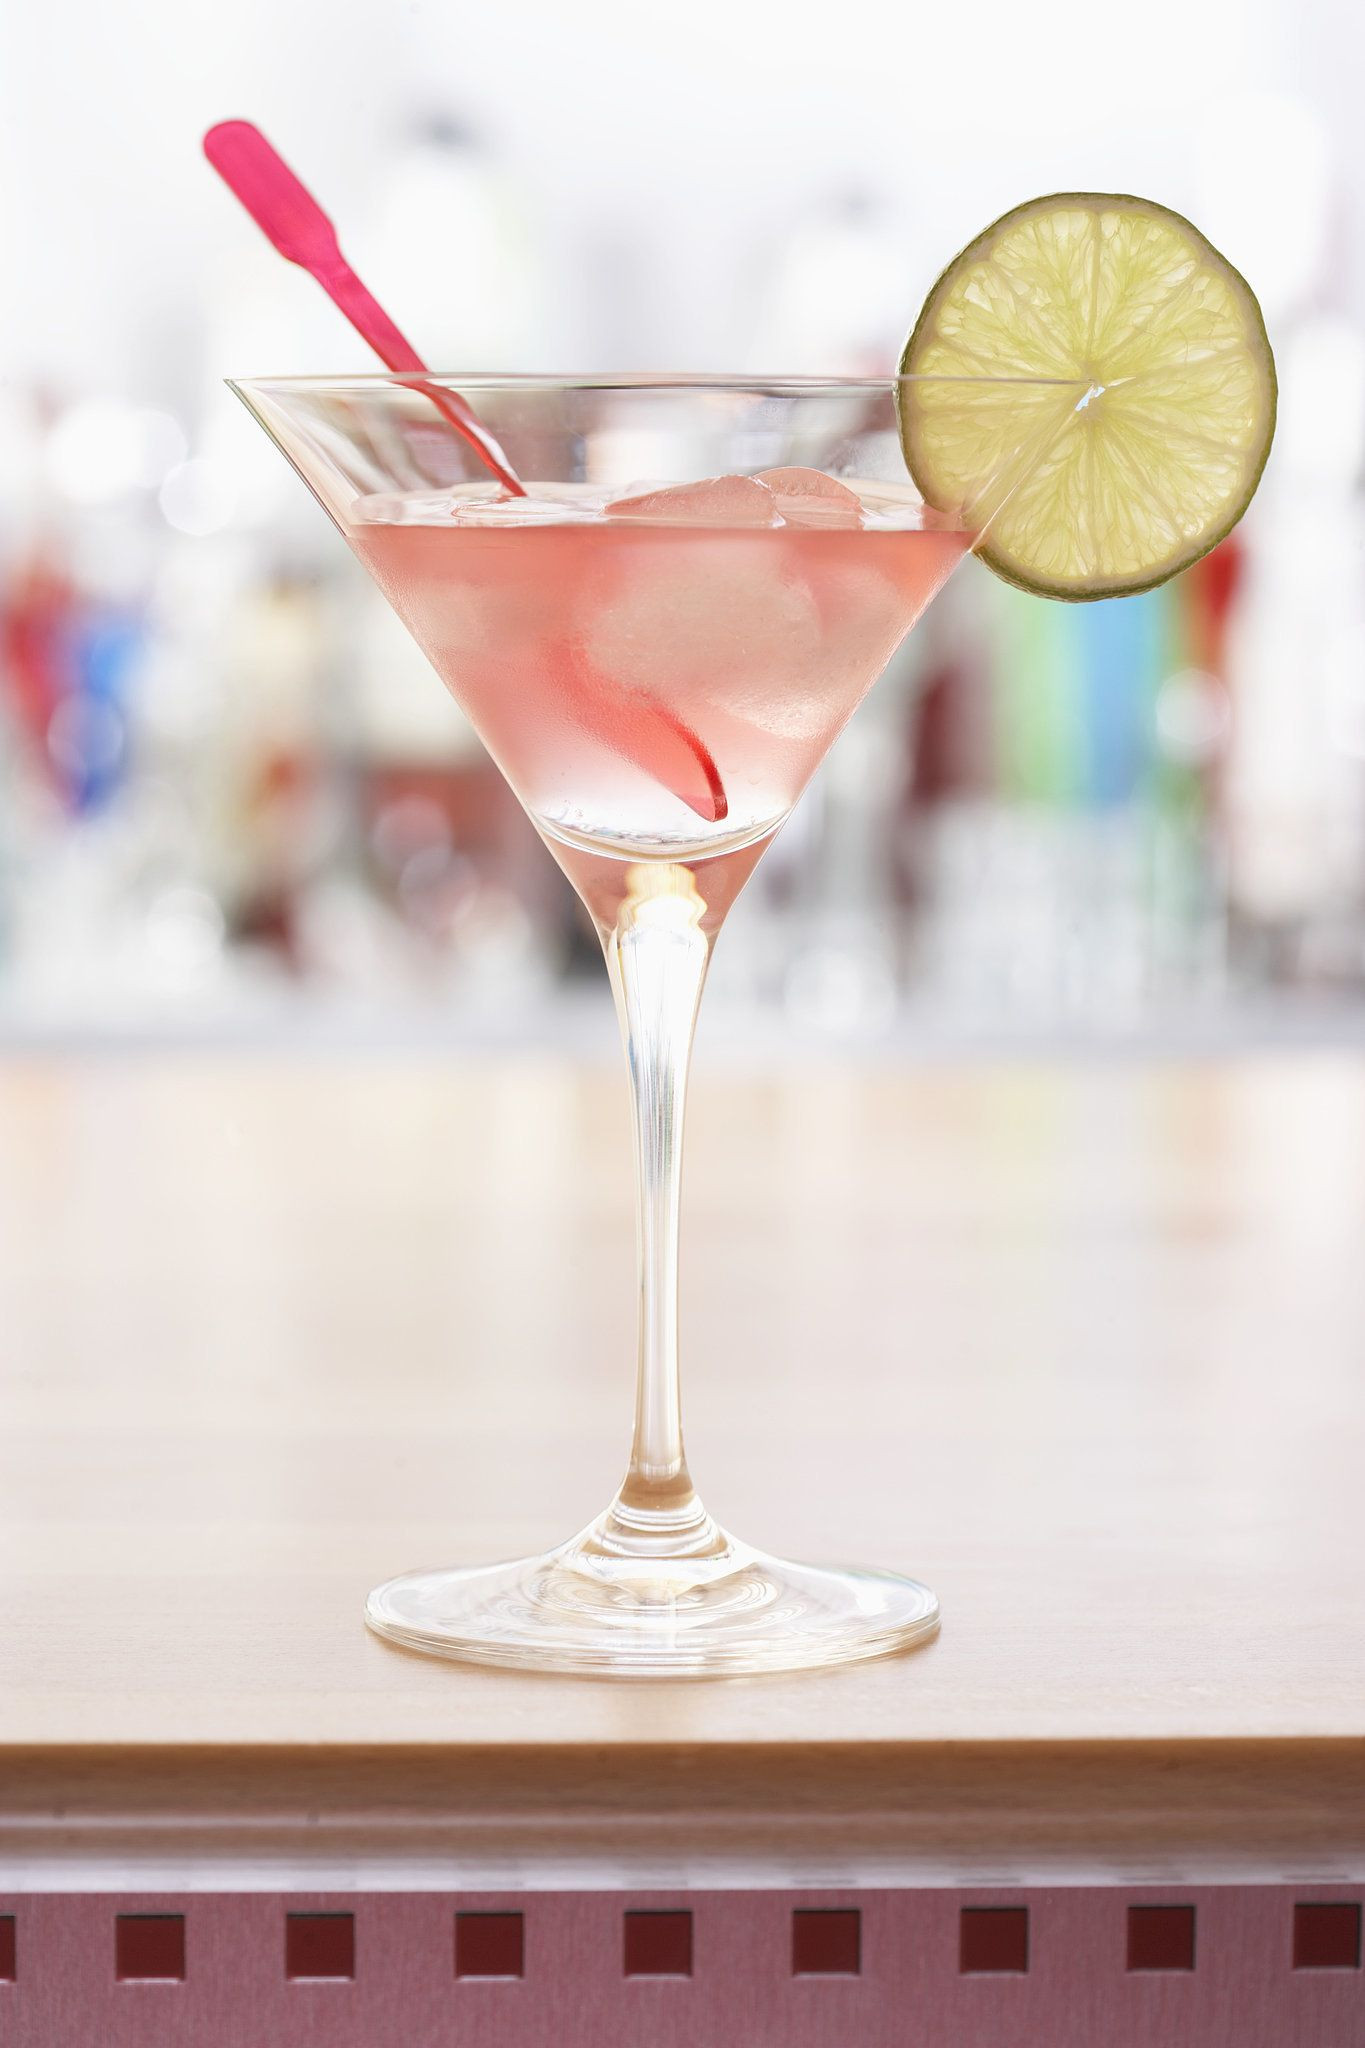 Low Calorie Vodka Drinks To Order At A Bar
 Cosmopolitan